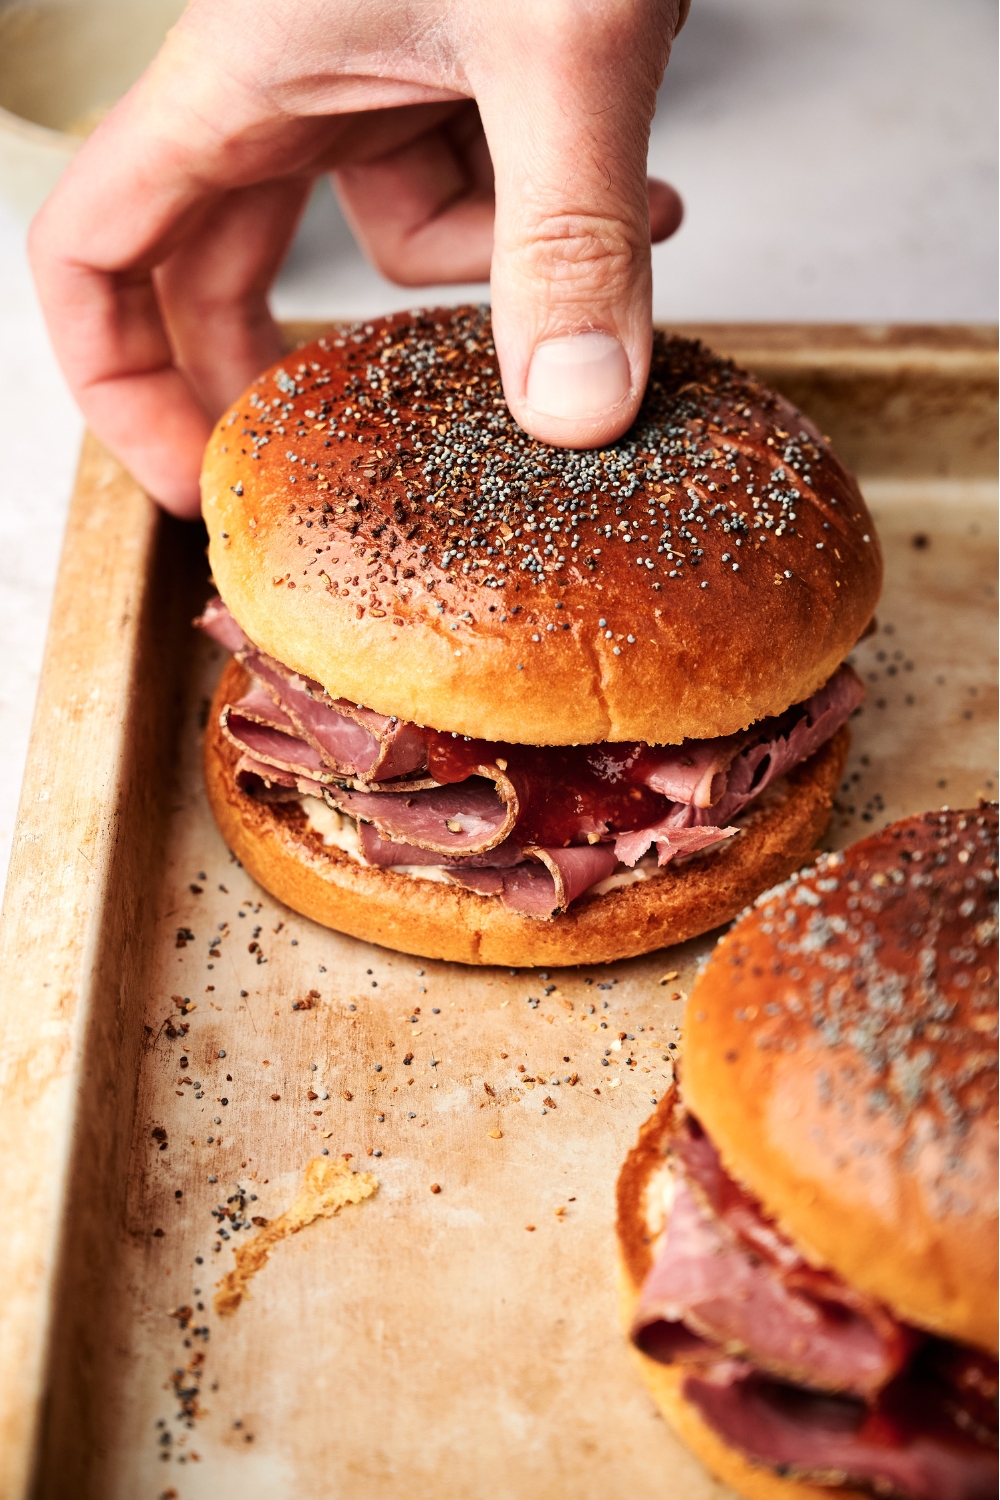 A roast beef sandwich on a baking sheet with a hand placing the top bun on it.